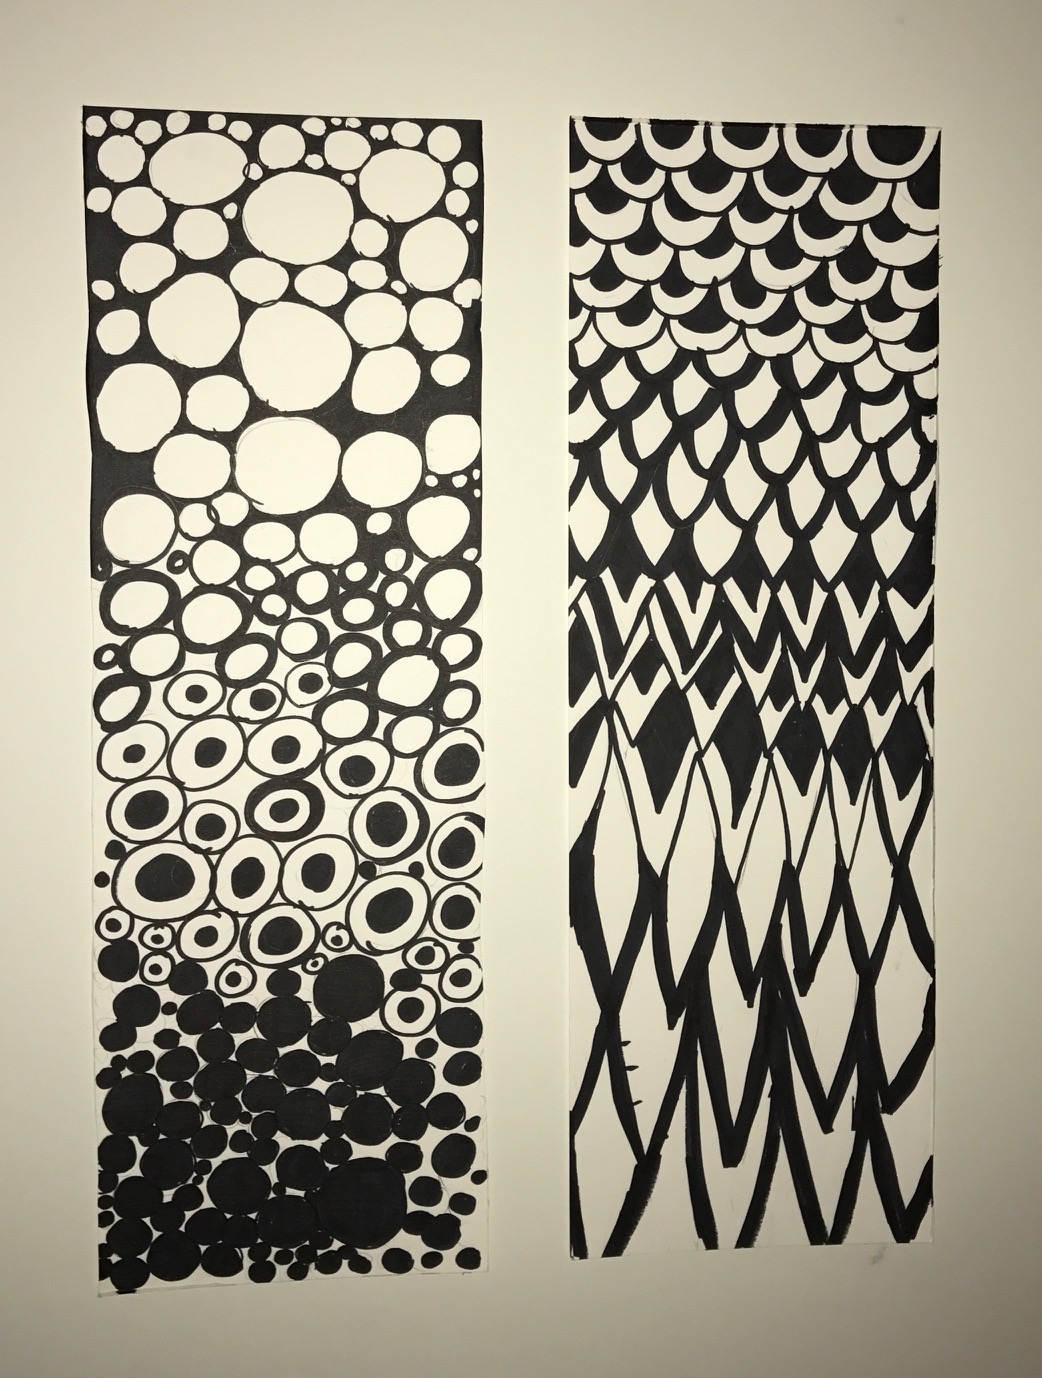 Space and Materiality- Patterns and experiments